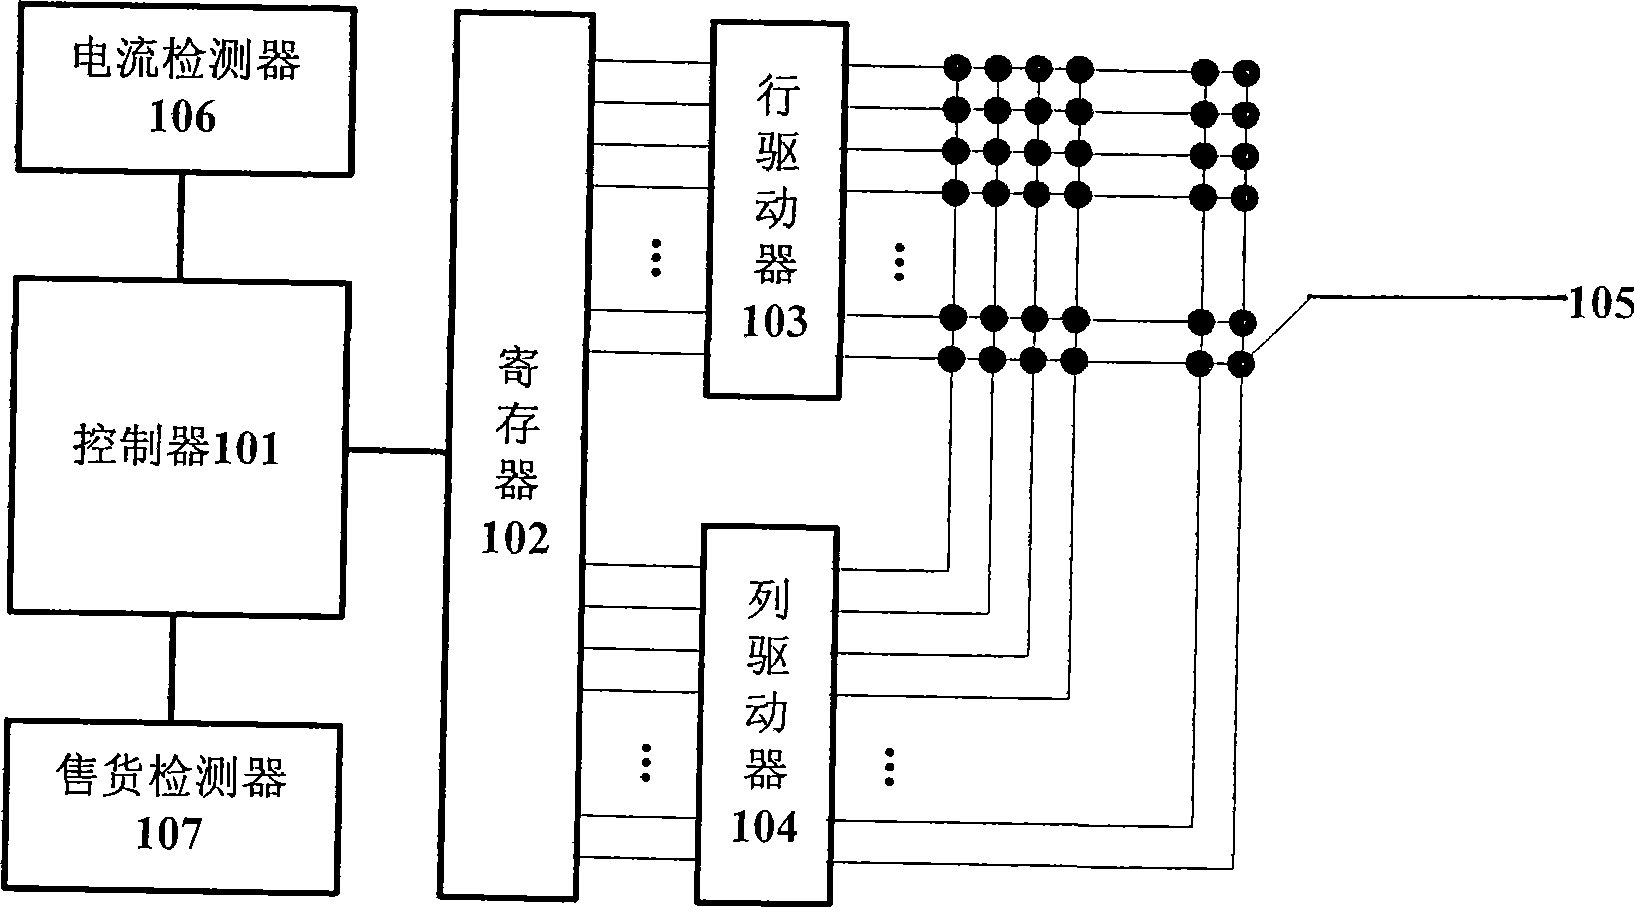 Commodity feeding device and method for vending machine